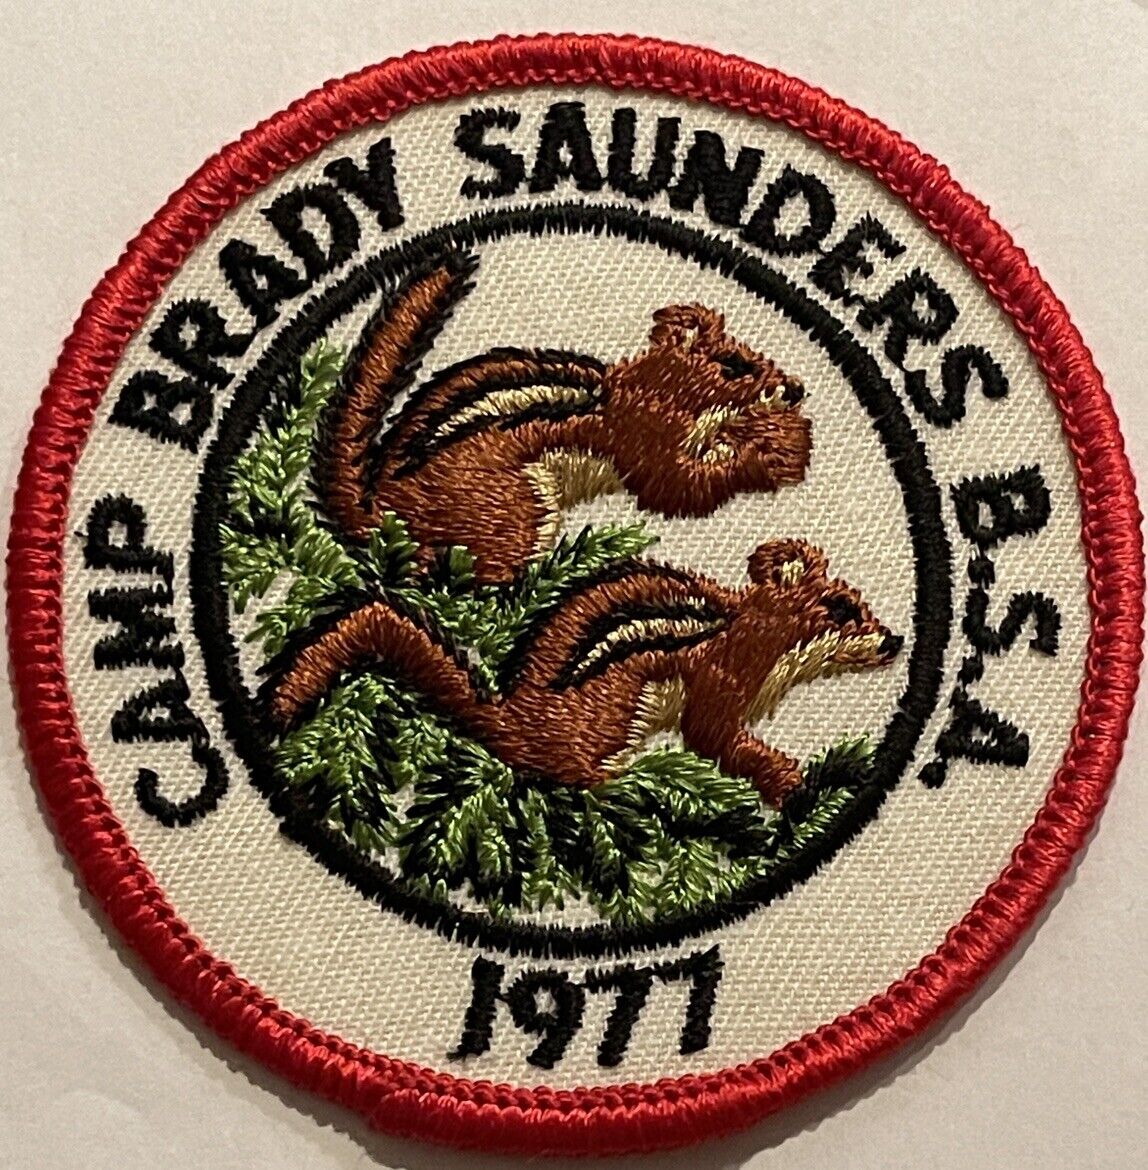 1977 Camp Brady Saunders Patch BSA Boy Scouts Of America Embroidered Badge Vtg